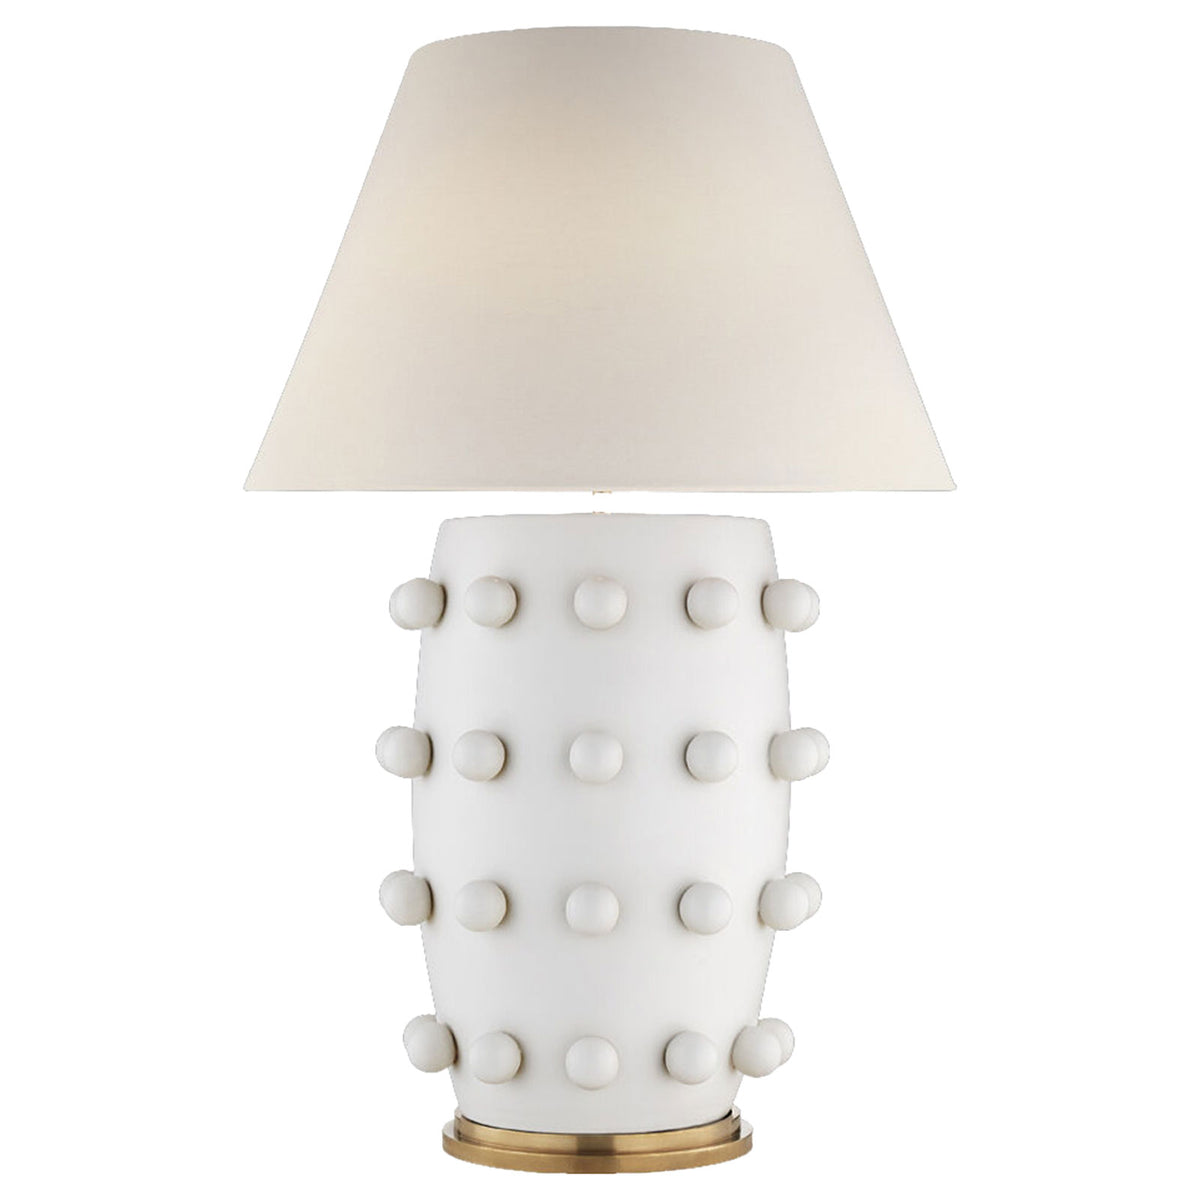 Linden Large Table Lamp, White